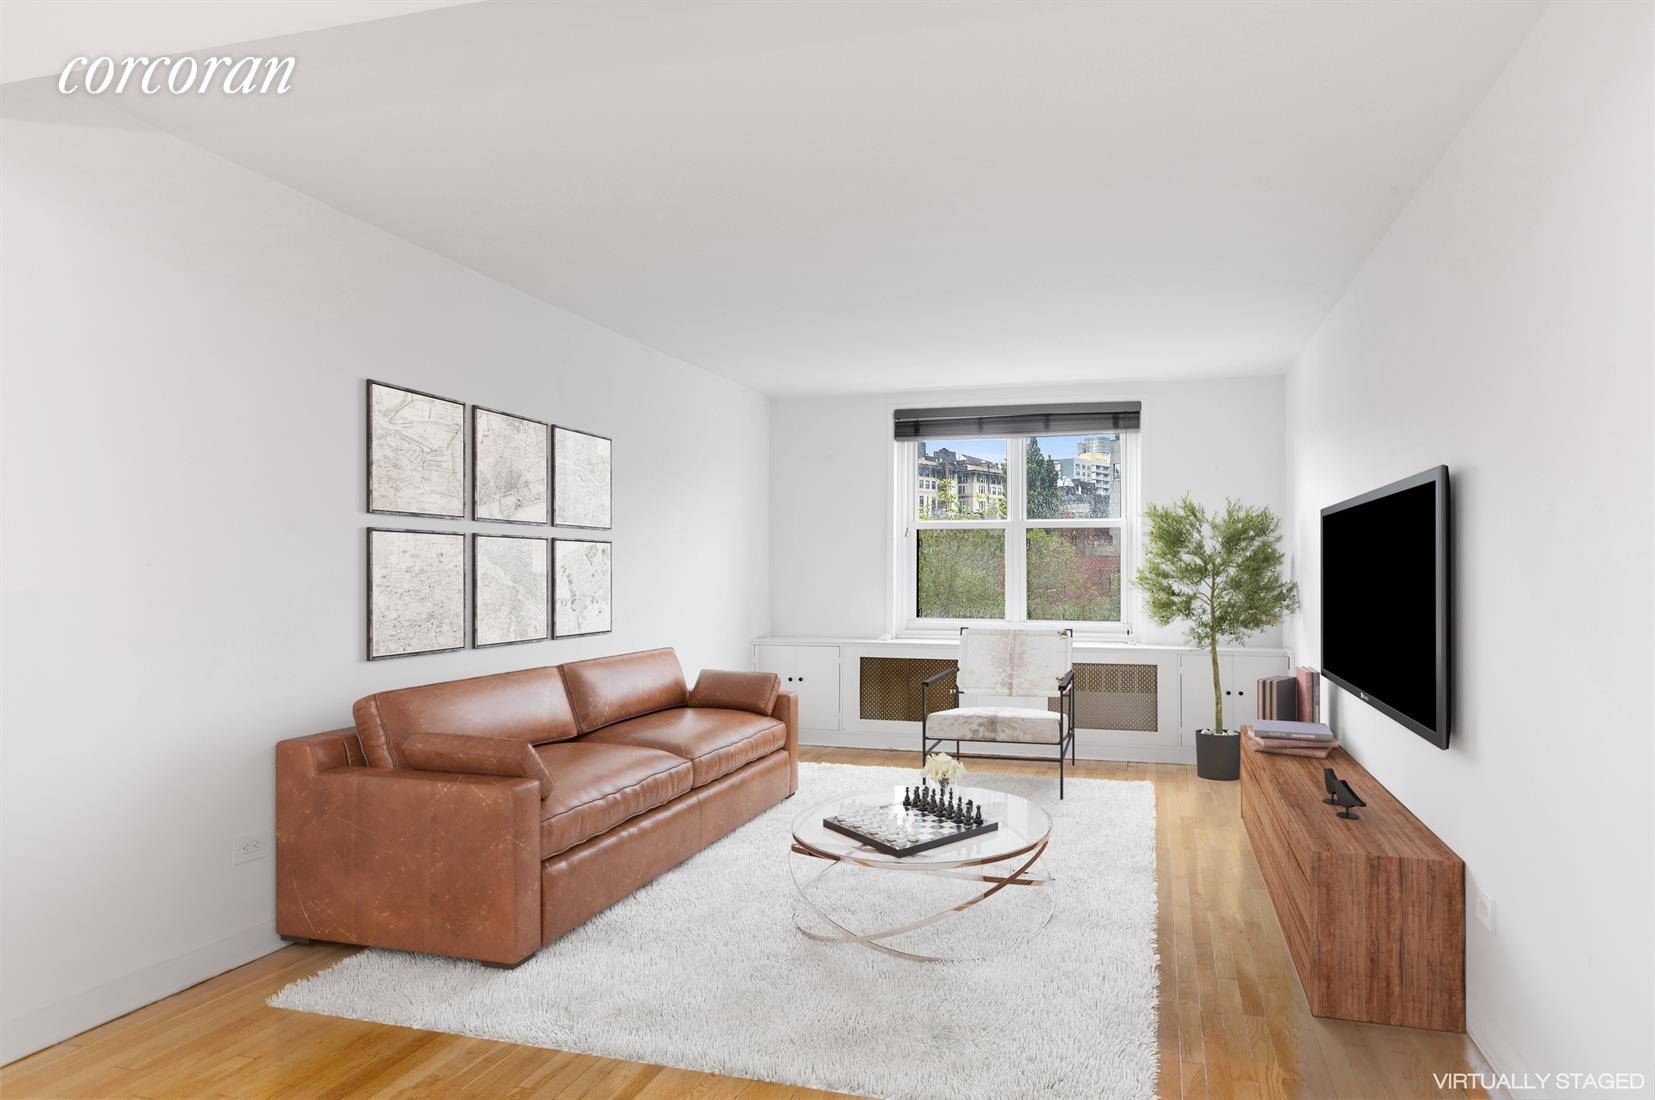 Nestled between Nolita and Soho, located on the 5th floor of a boutique cooperative, this gorgeous one bedroom offers north eastern exposures with Empire State Building and tree views.